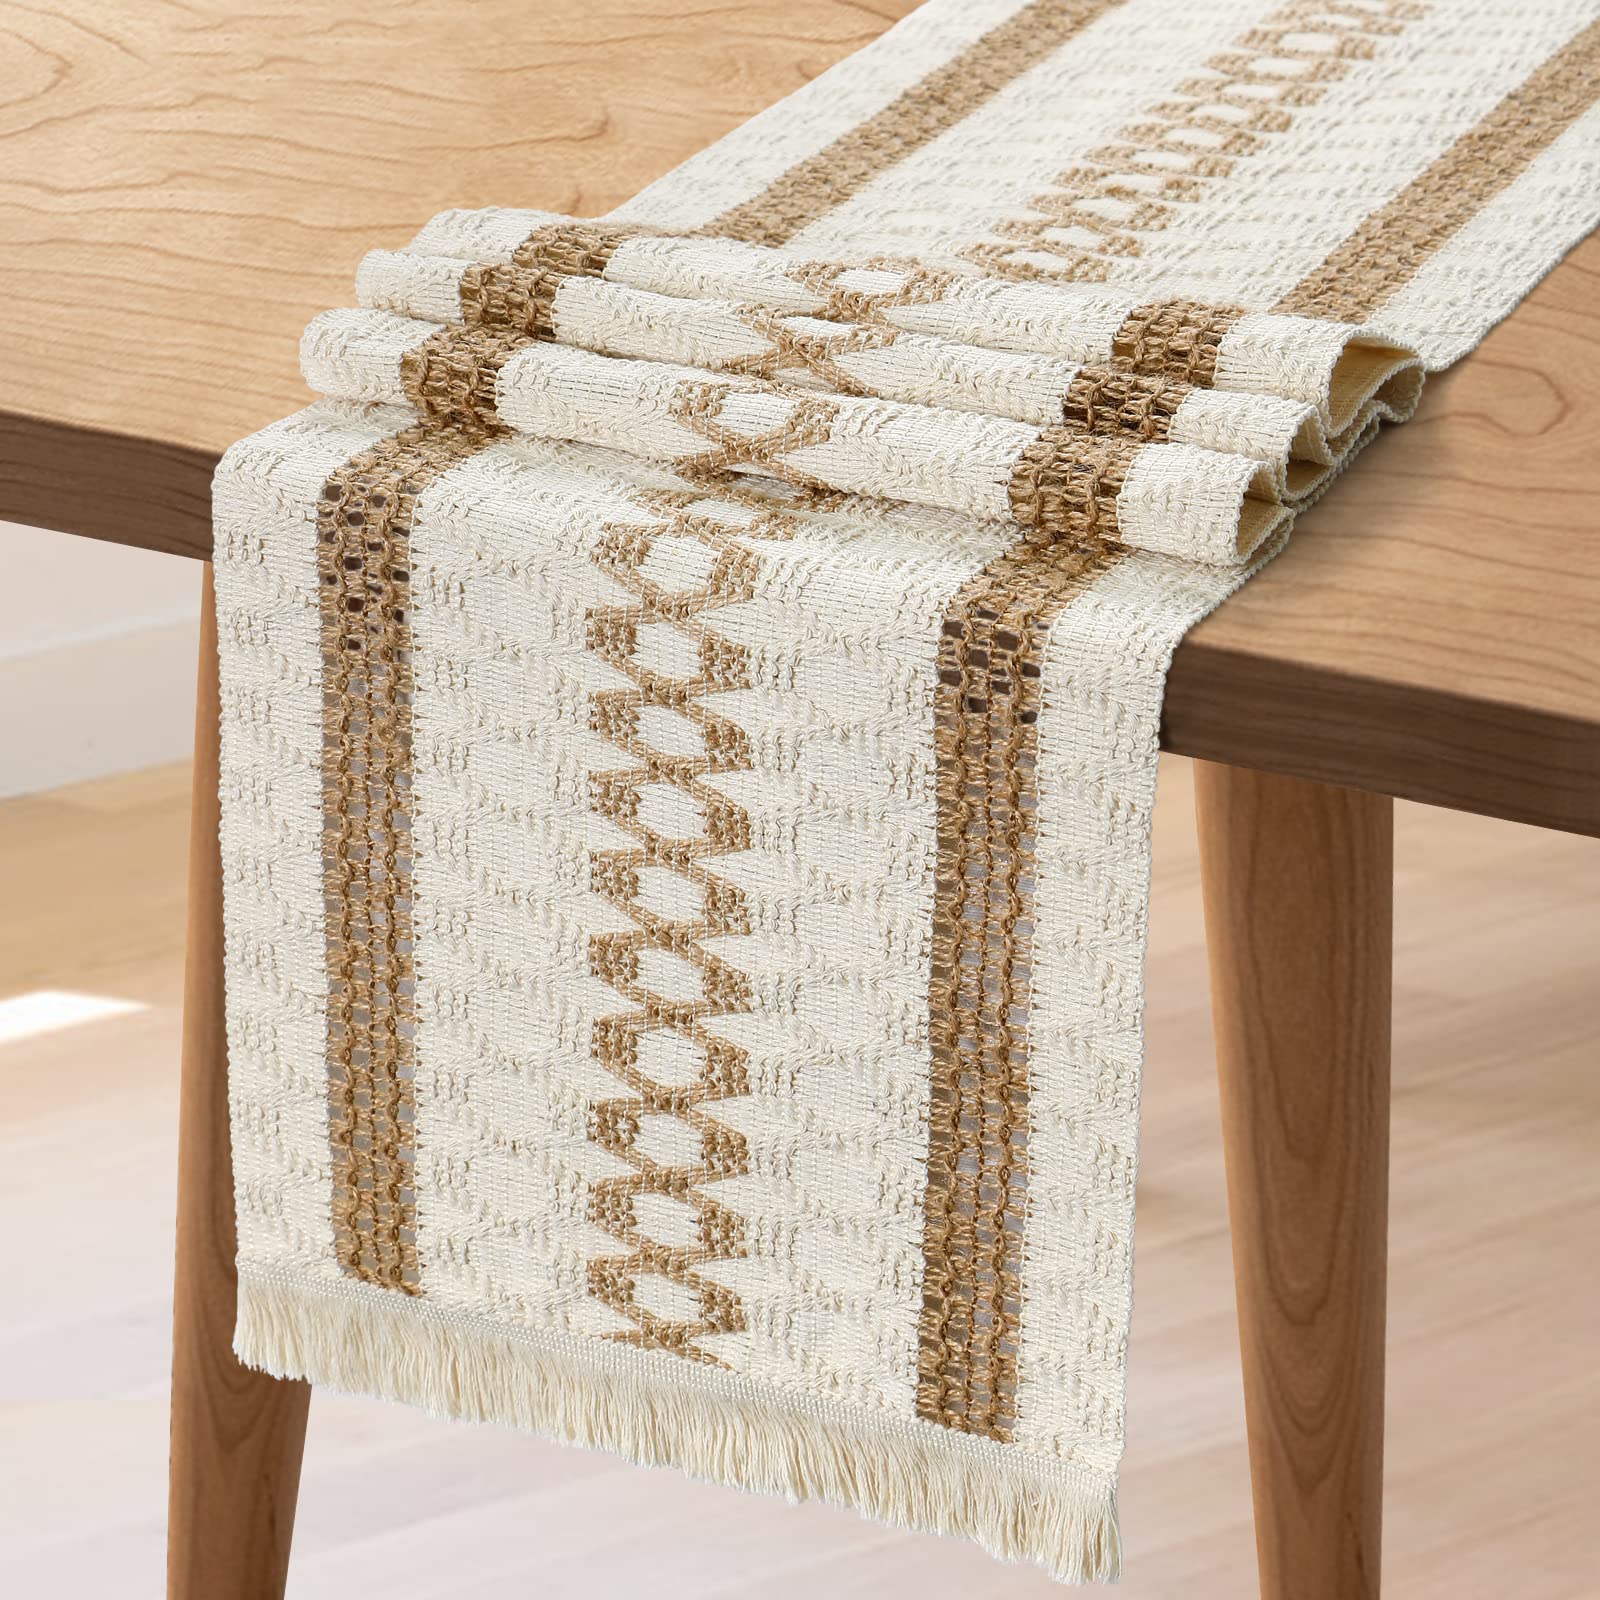 Dremisland Macrame Table Runner Splicing Cotton Table Runner Natural Burlap Table Runner with Tassels Bohemian Table Cover for Wedding Party Farmhouse Dining Table Decor